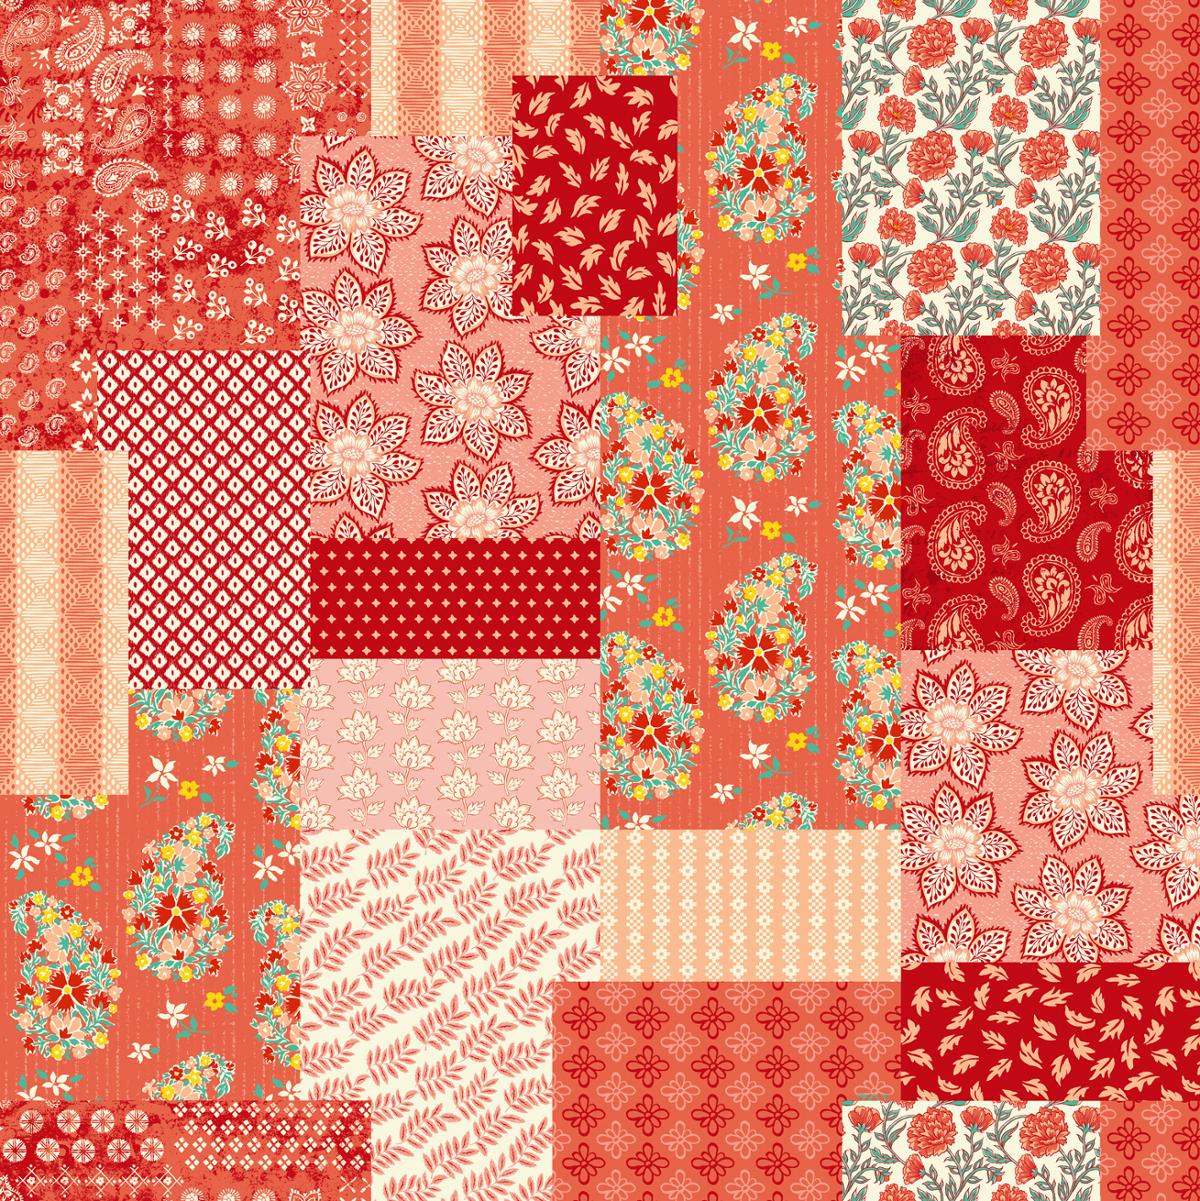 Cadence  Patchwork Persimmon - Crystal Manning - 50 cm